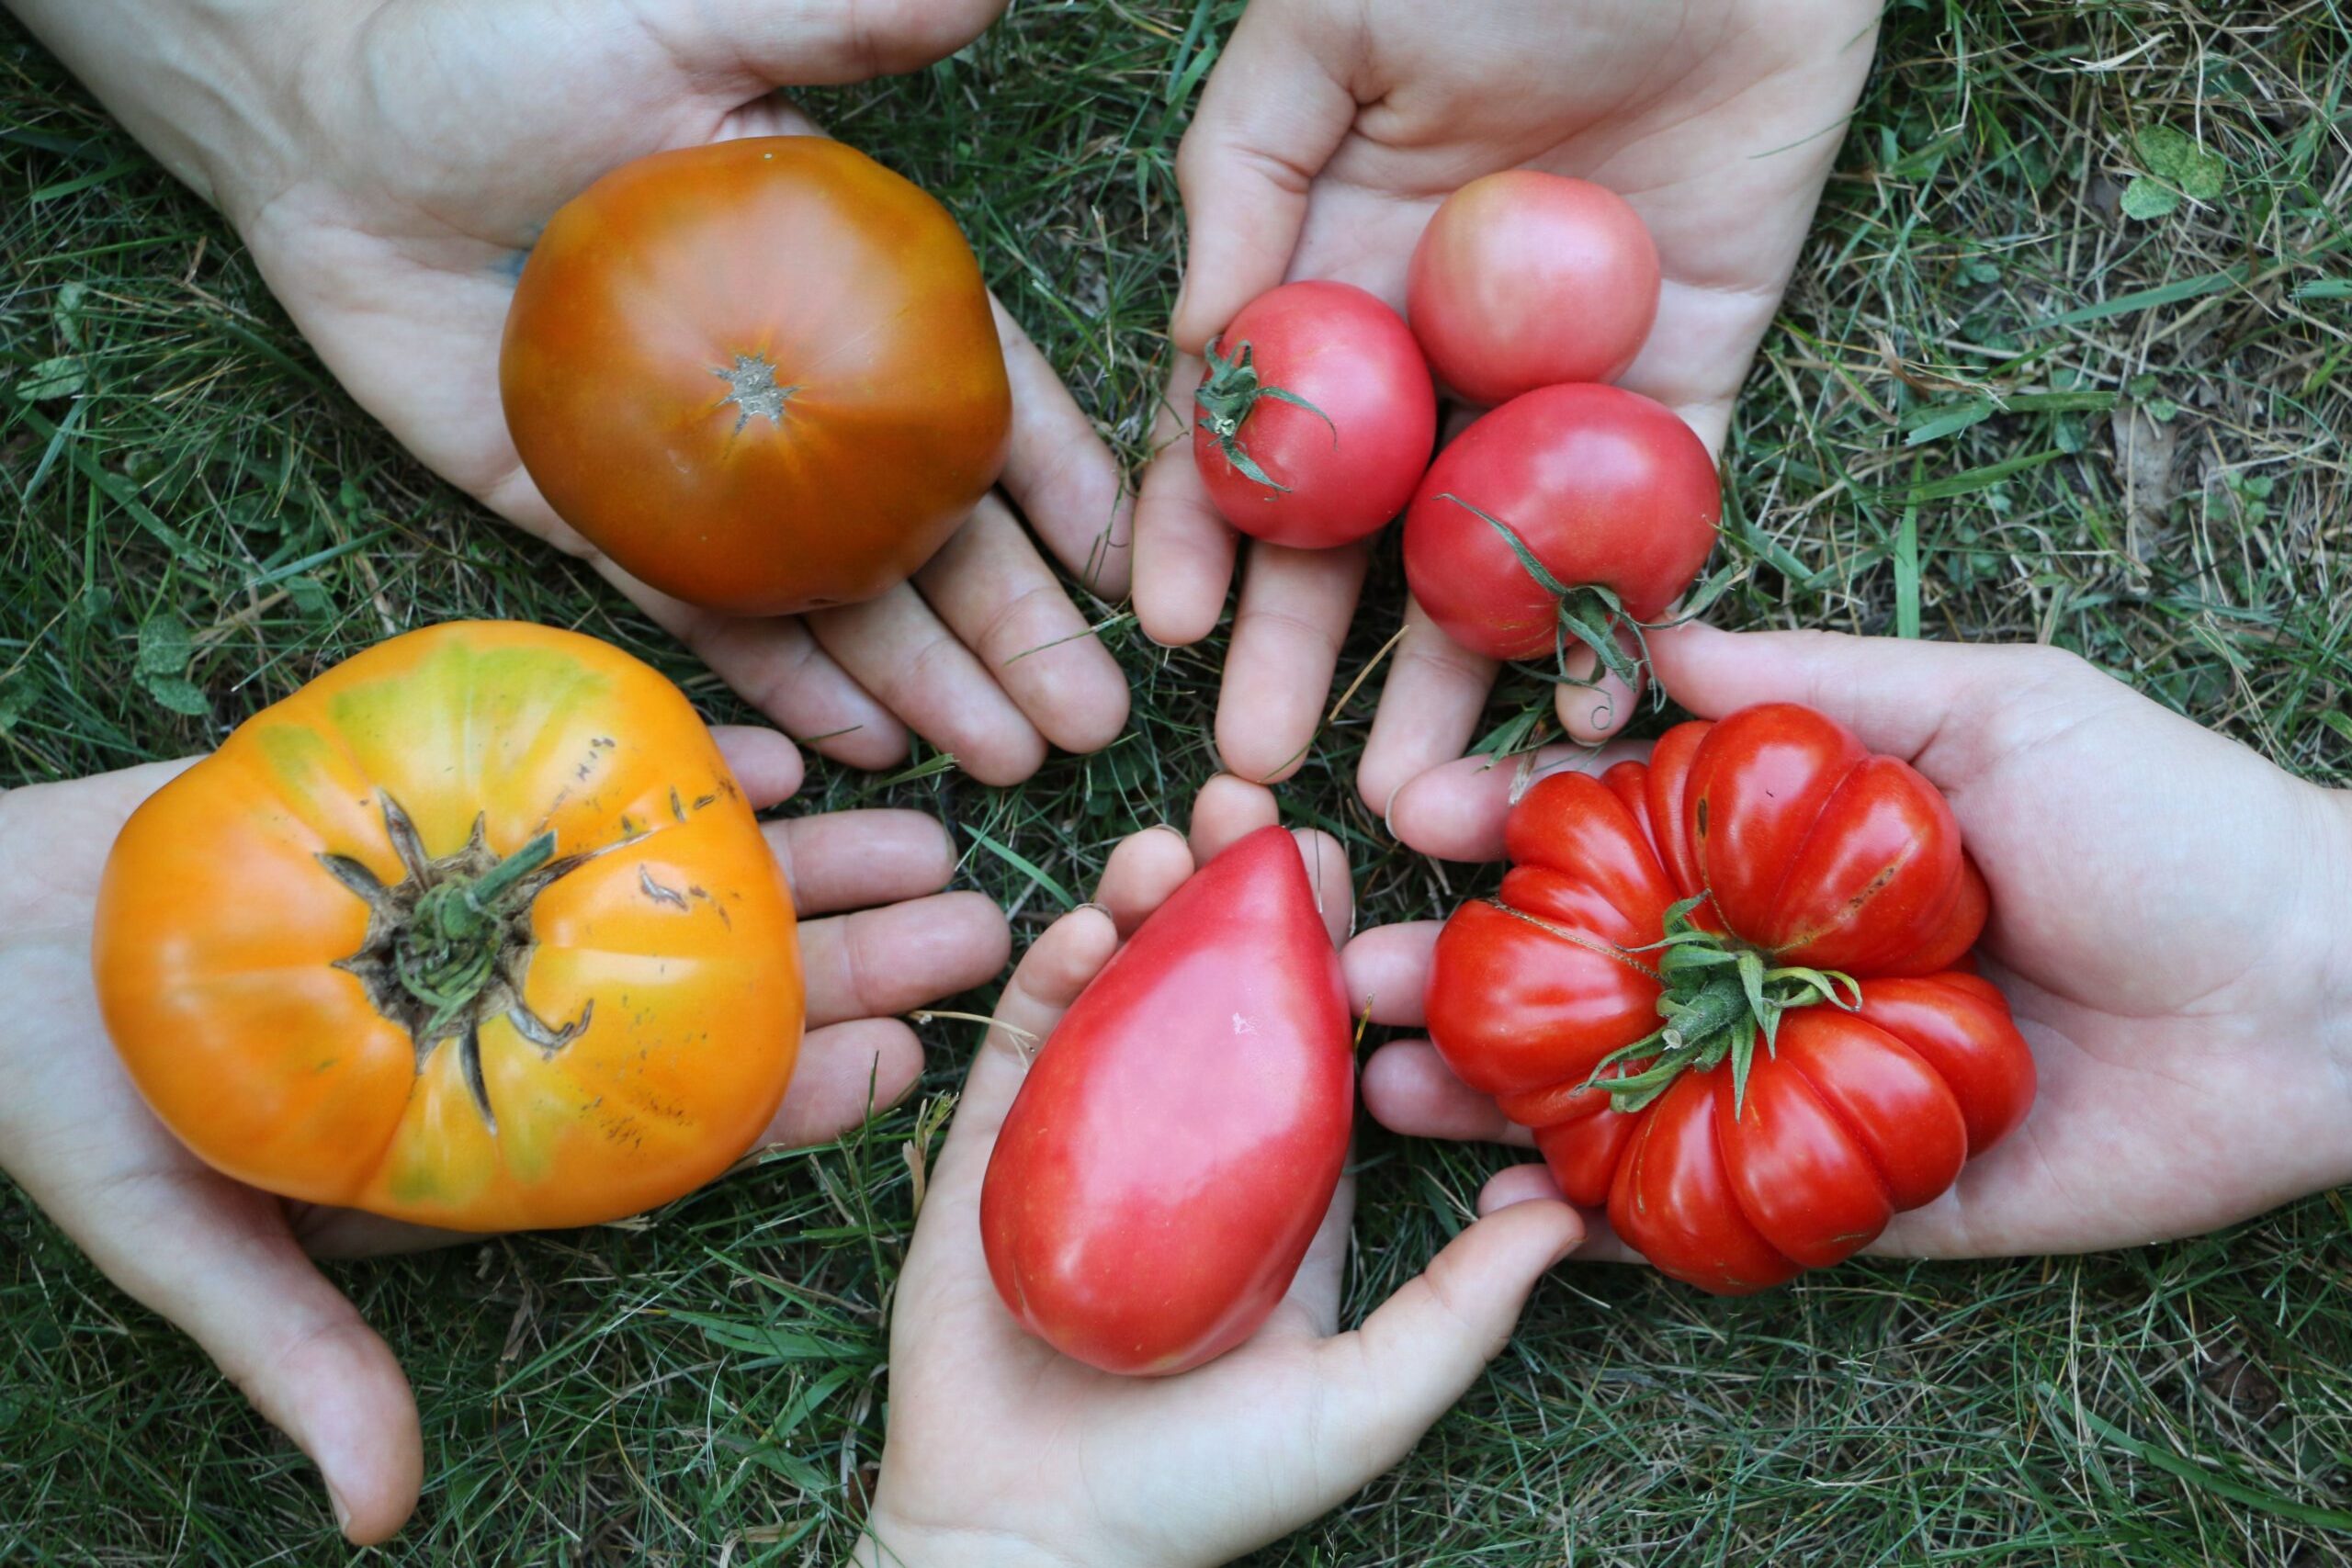 Saving your garden seeds and building a community in the process